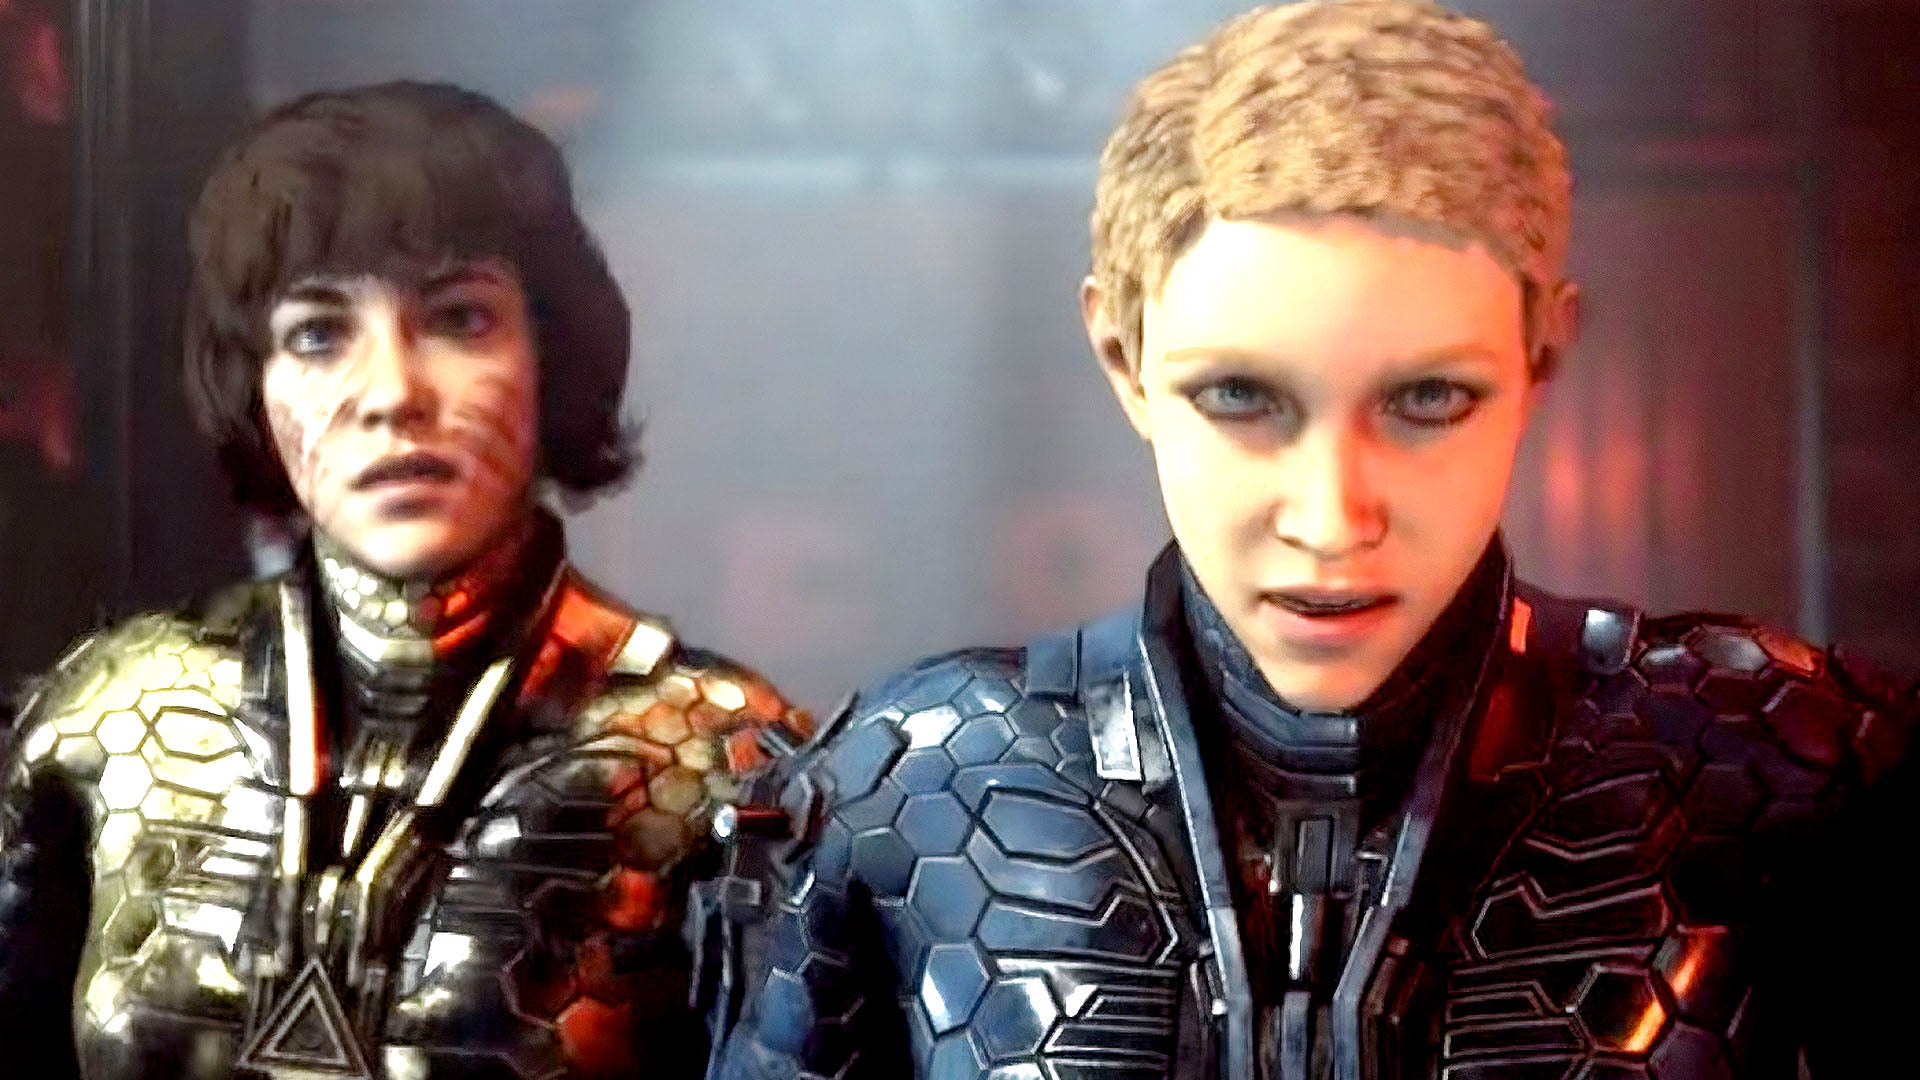 Image for Wolfenstein Youngblood - Ray Tracing/VRS/DLSS in id Tech 6 - A Next-Gen Features Showcase?